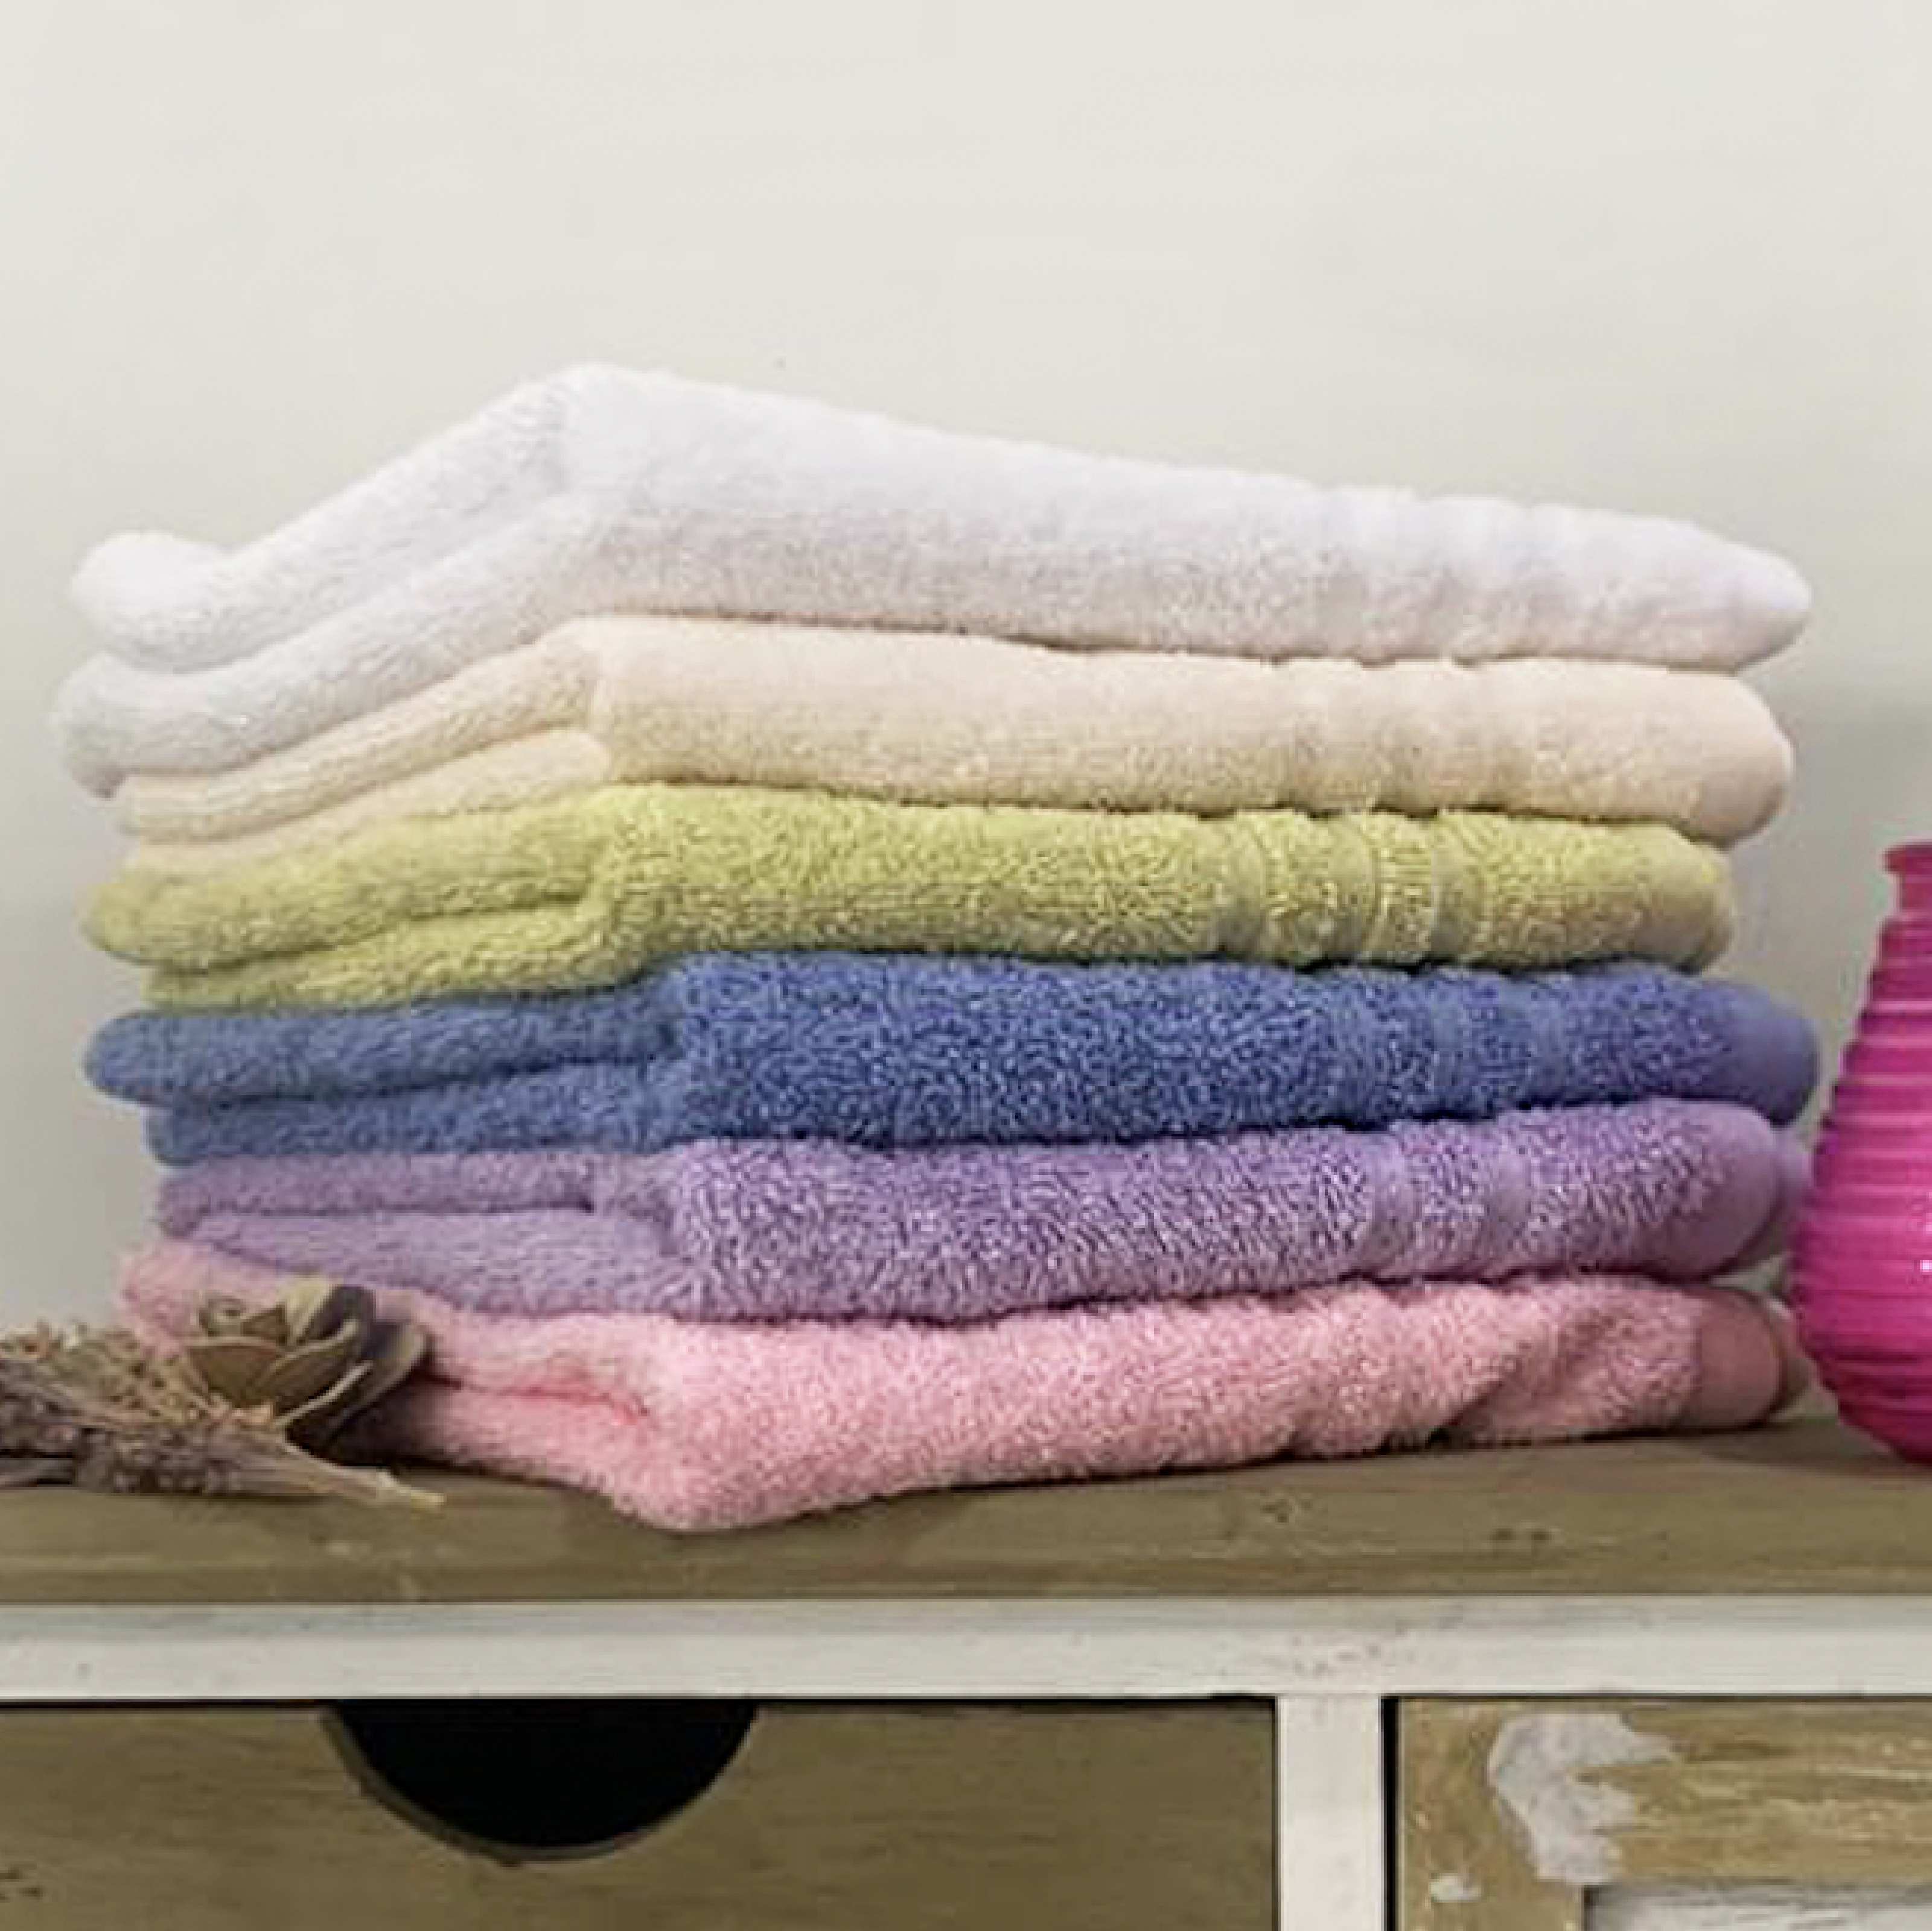 Coventry Bath Towel, 1 Piece 50x100cm 100% Cotton Available in Colors